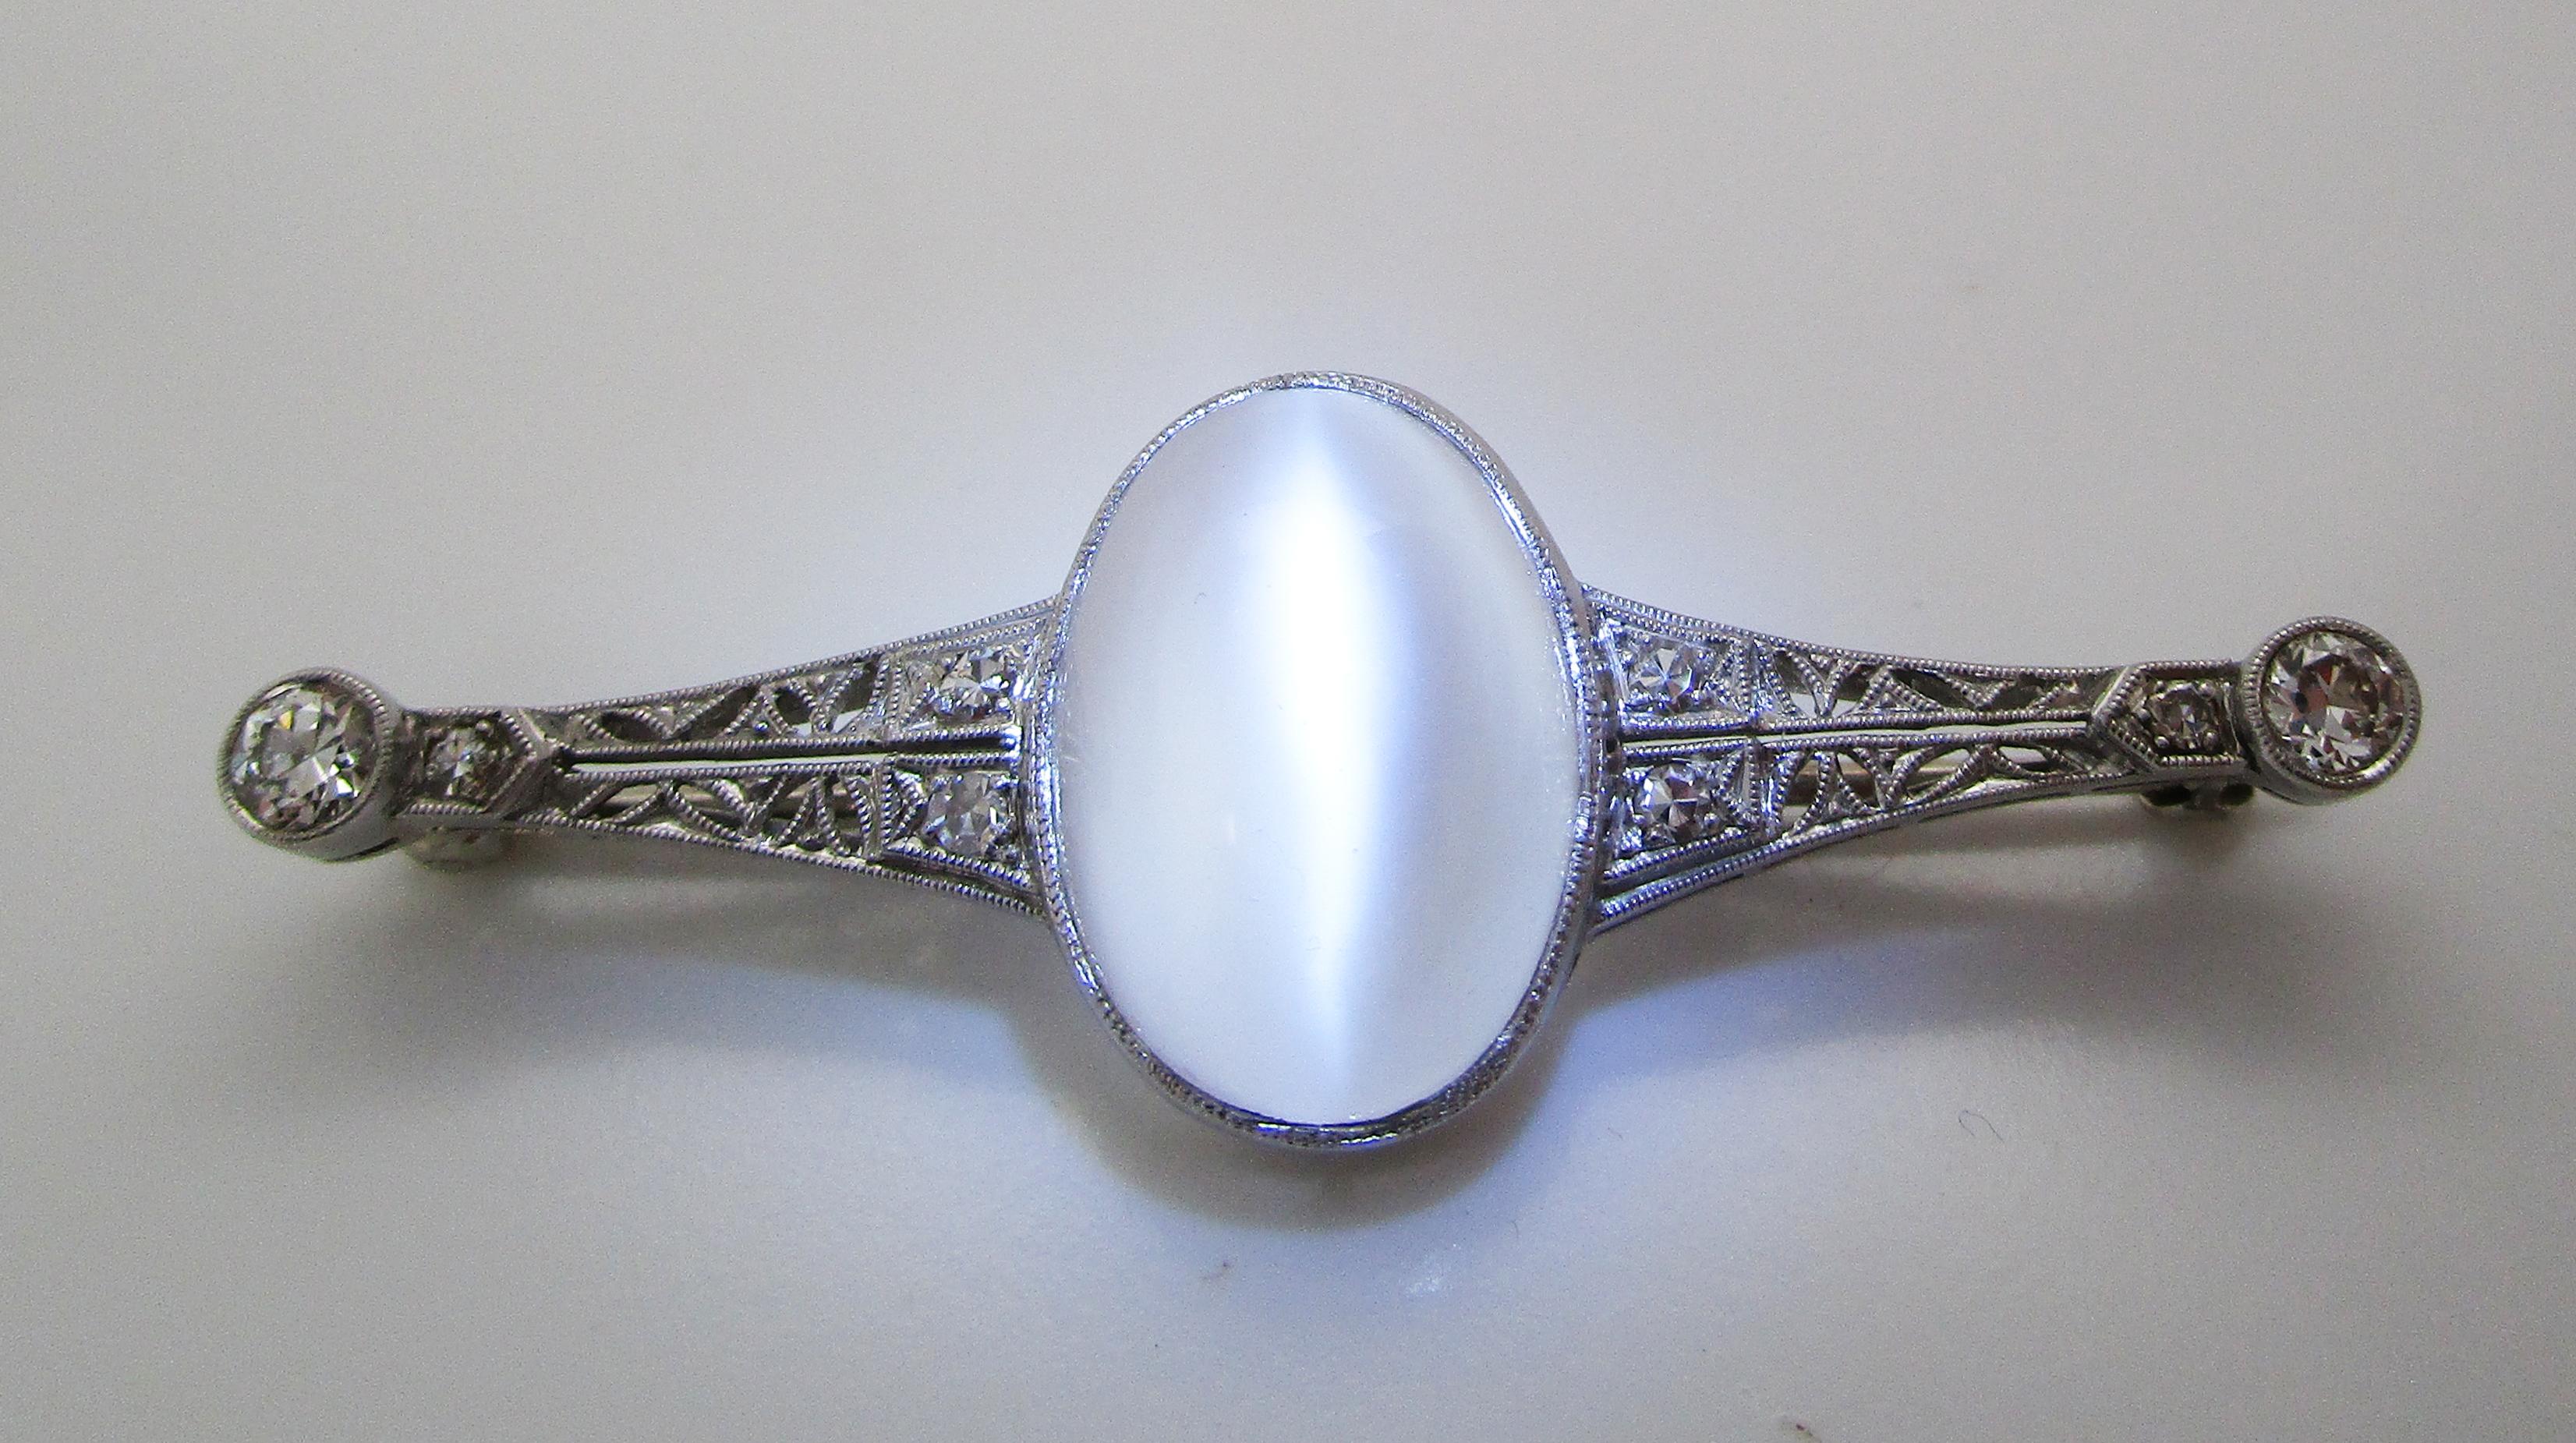 This beautiful Edwardian pin is in platinum with gorgeous pierced filigree set with stunning diamonds and an enchanting cat’s eye moonstone center! The pin has a lovely bar pin layout with a diamond at each end and a gorgeous moonstone center. The